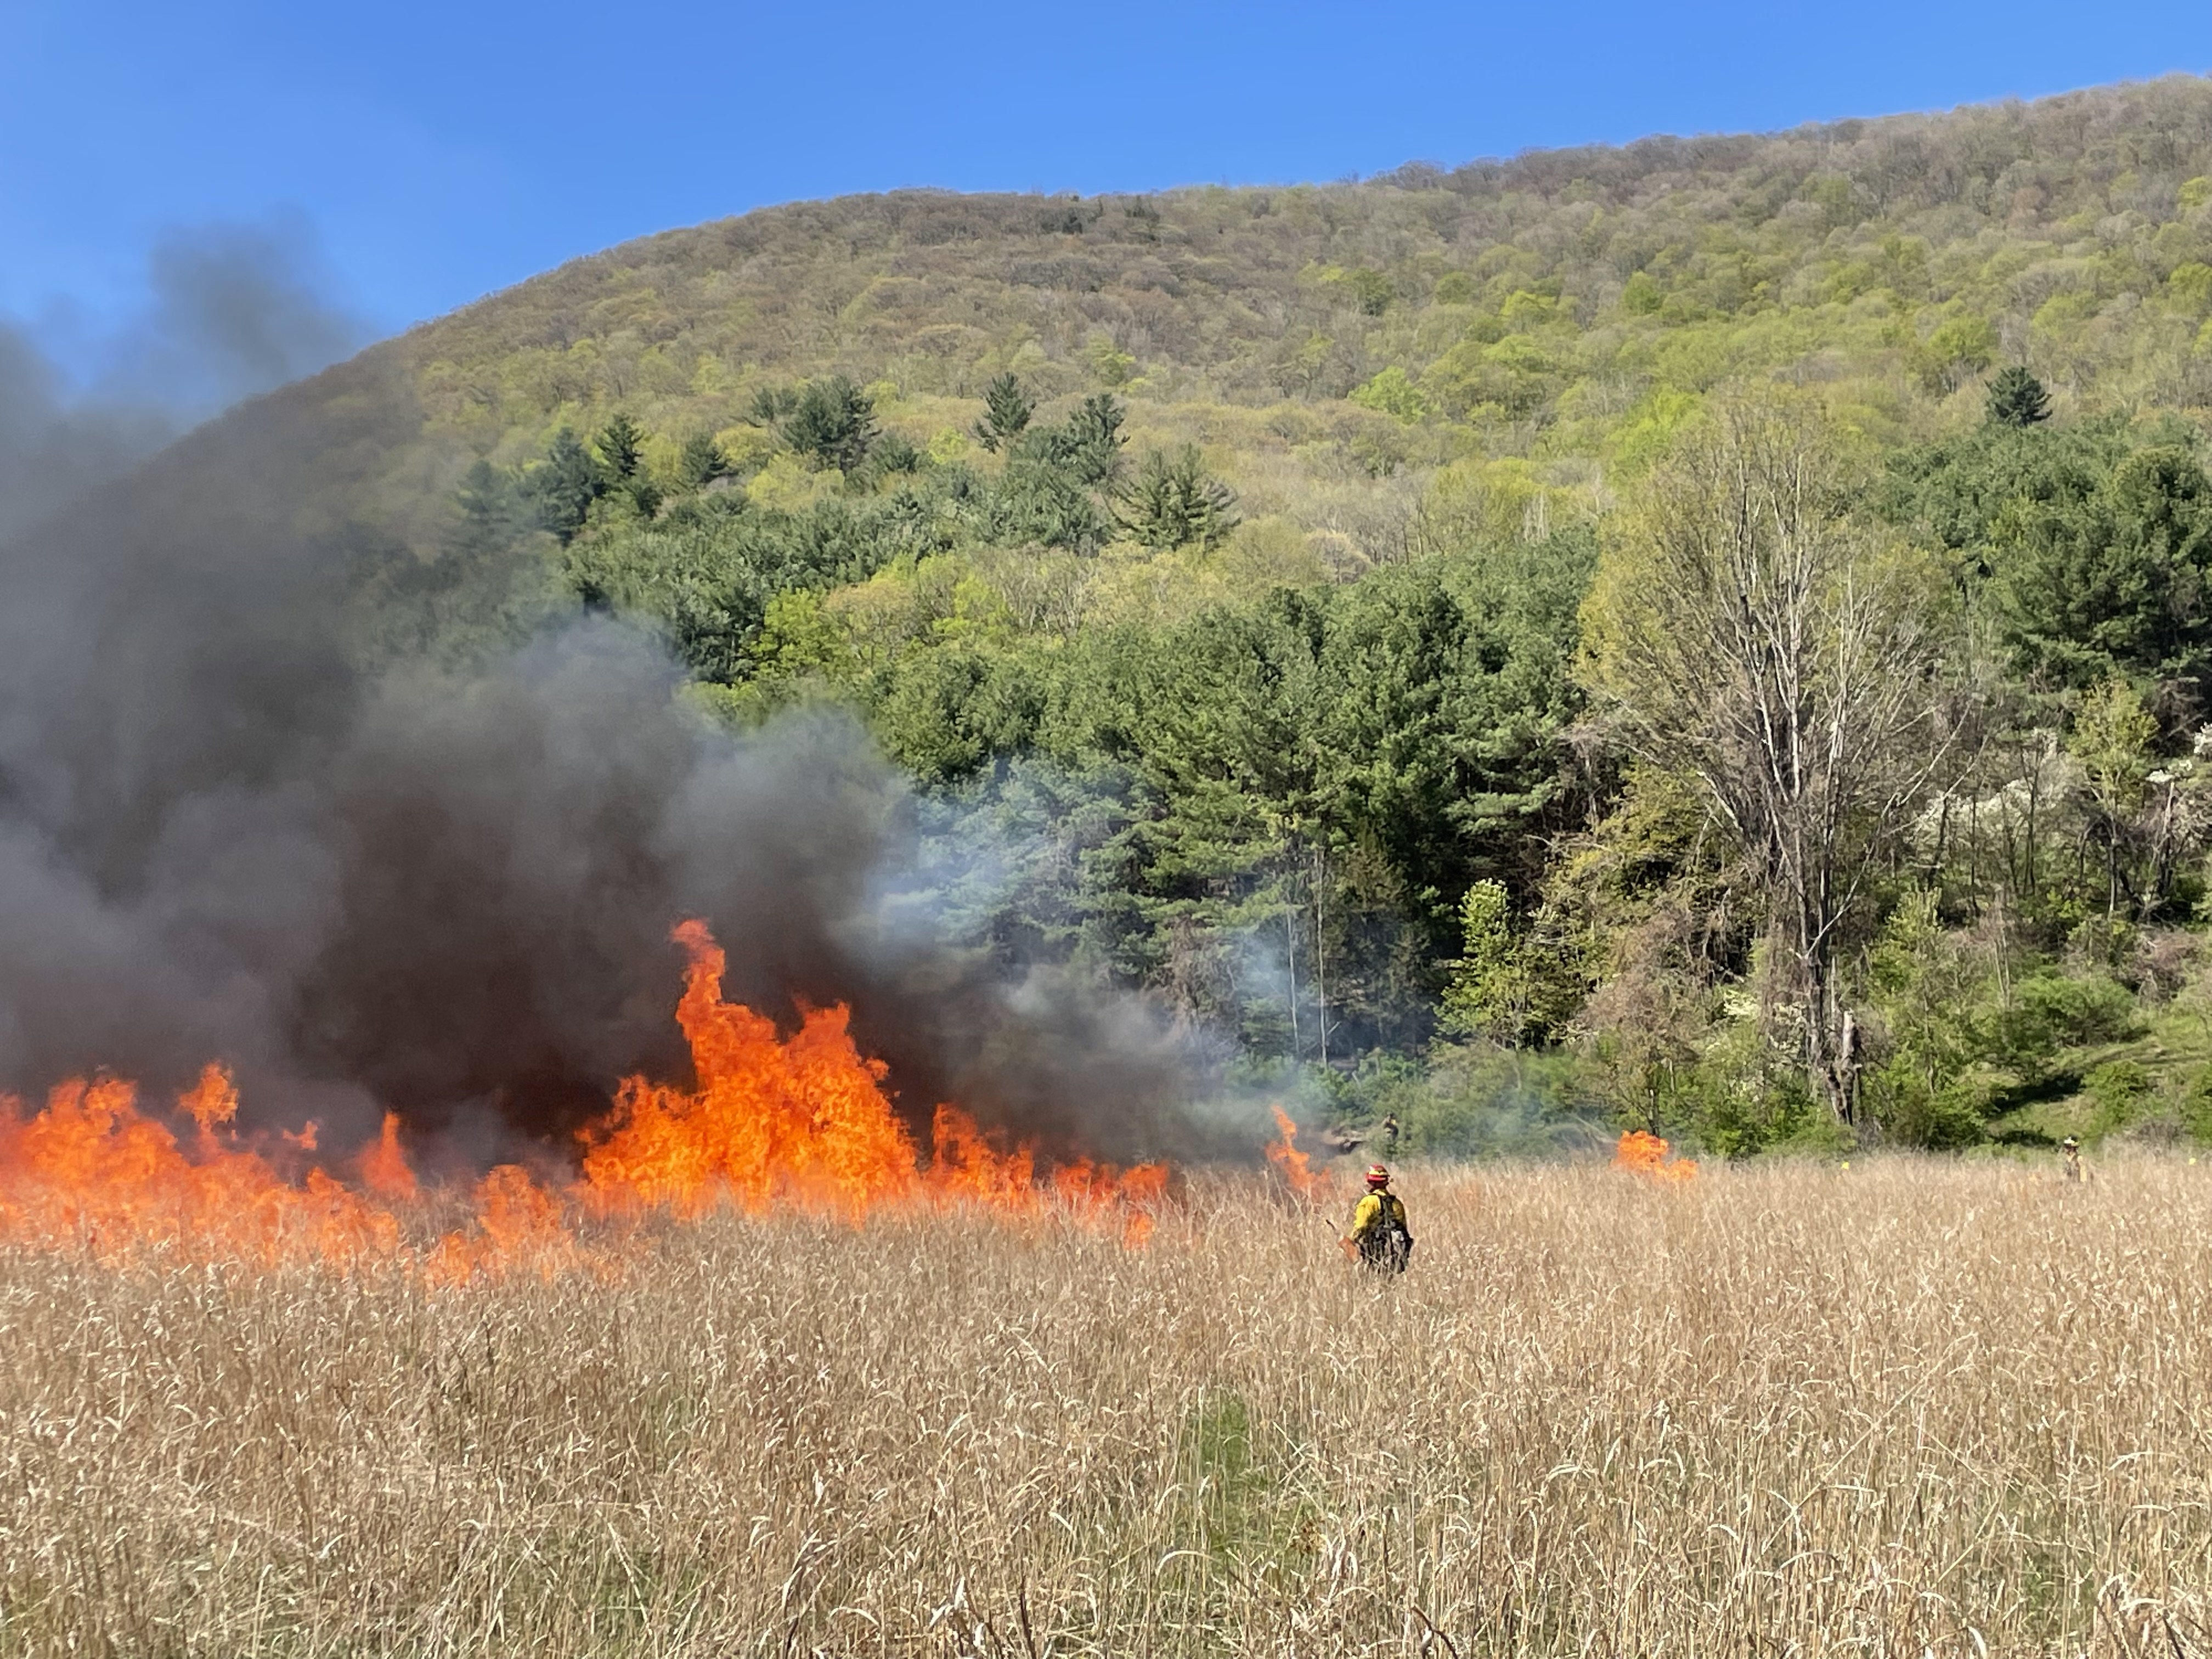 A person stands in a field in yellow fire gear near an orange flame.